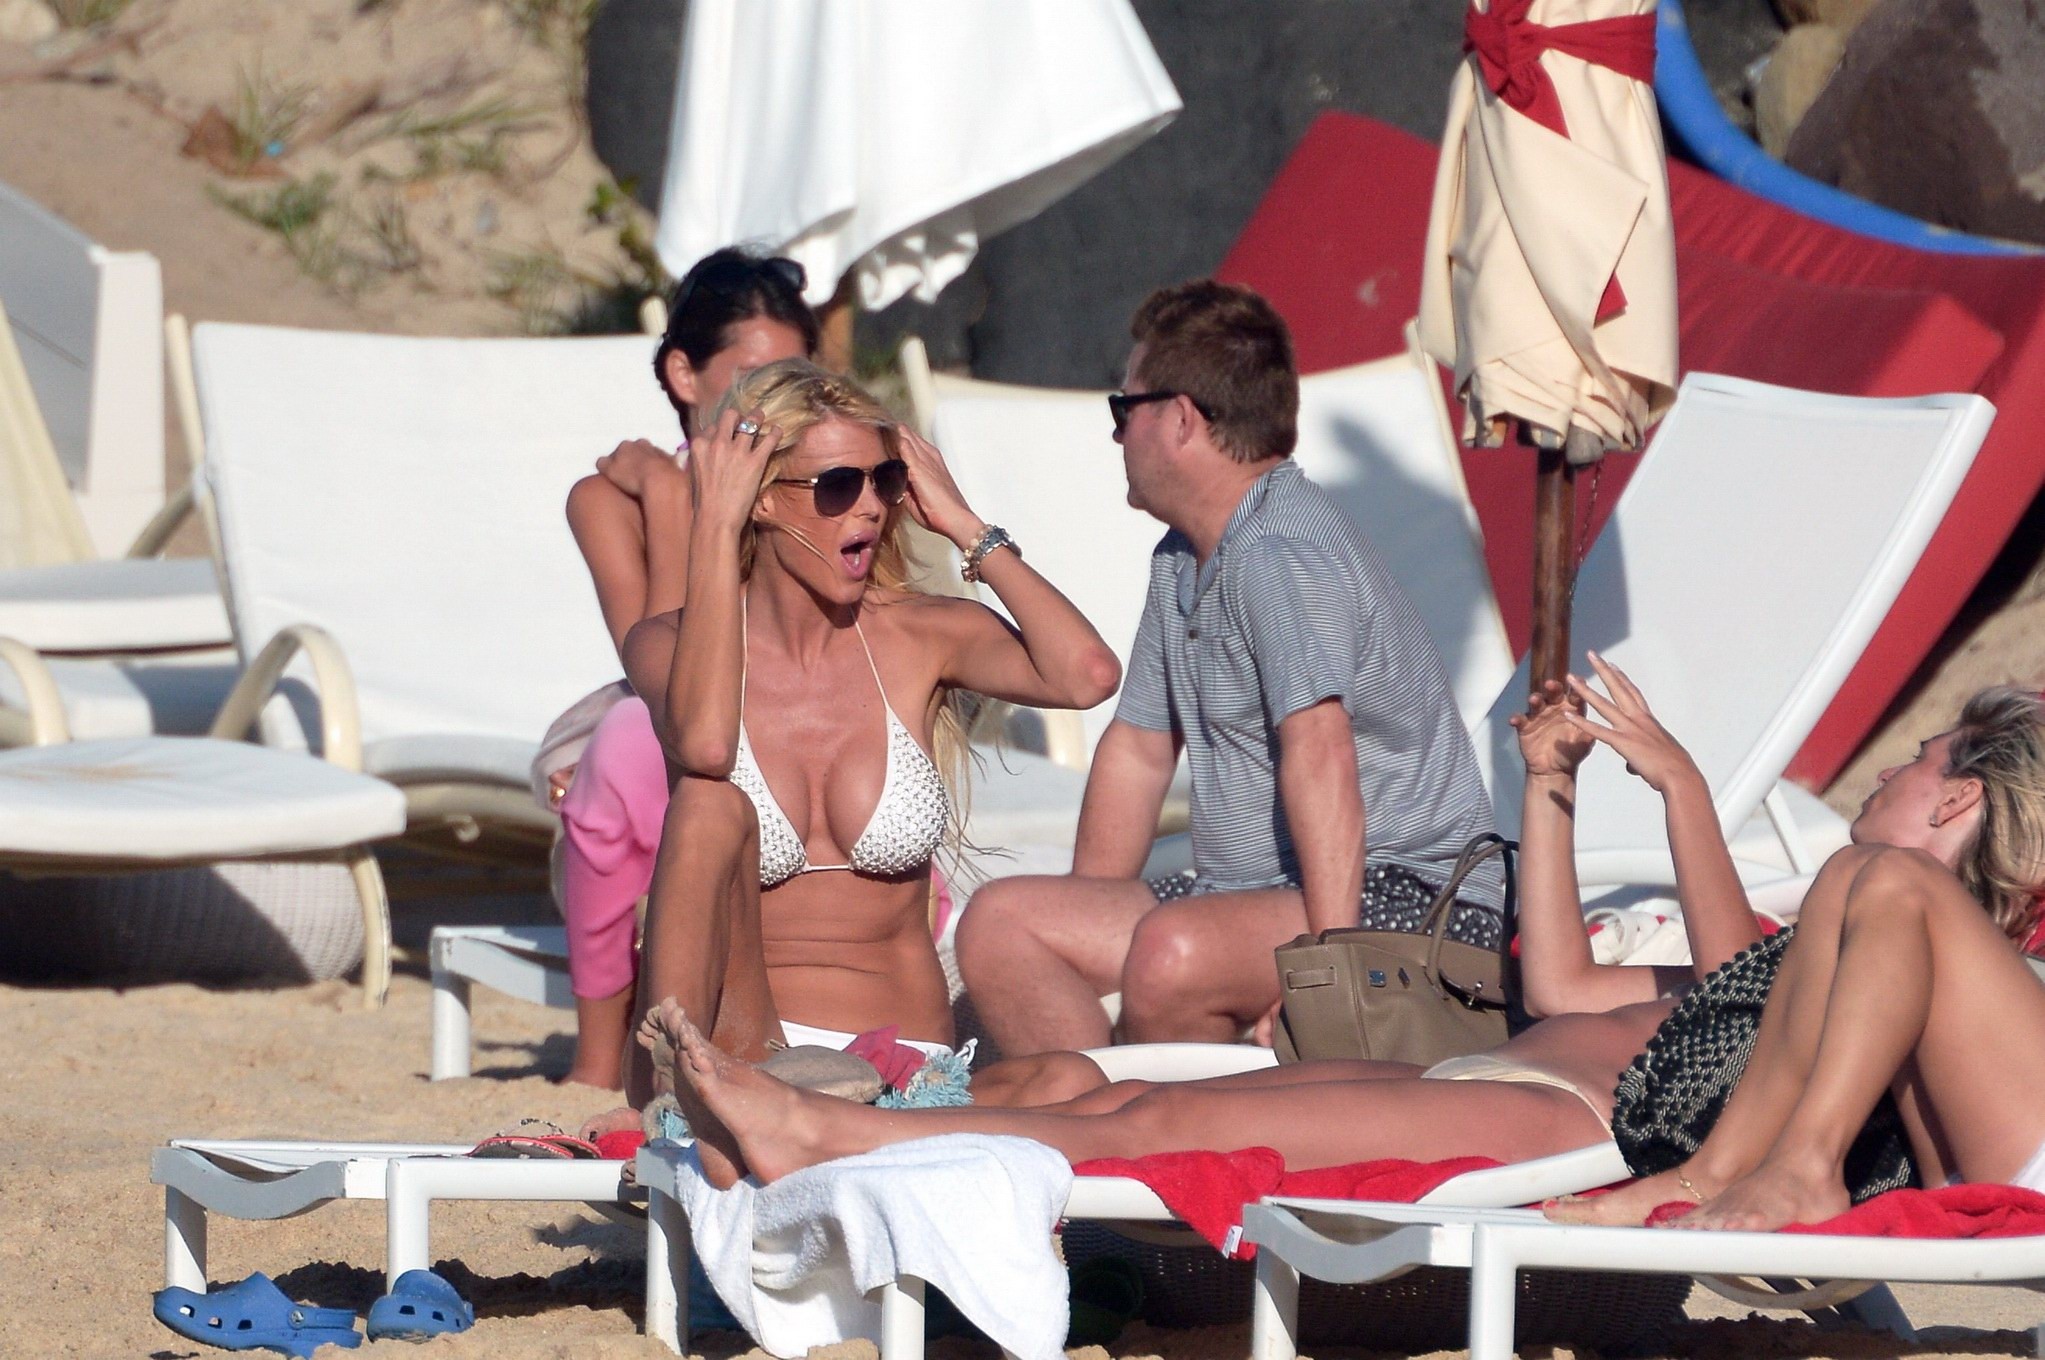 Victoria Silvstedt spills out her white bikini at the beach in St.Barts #75208557